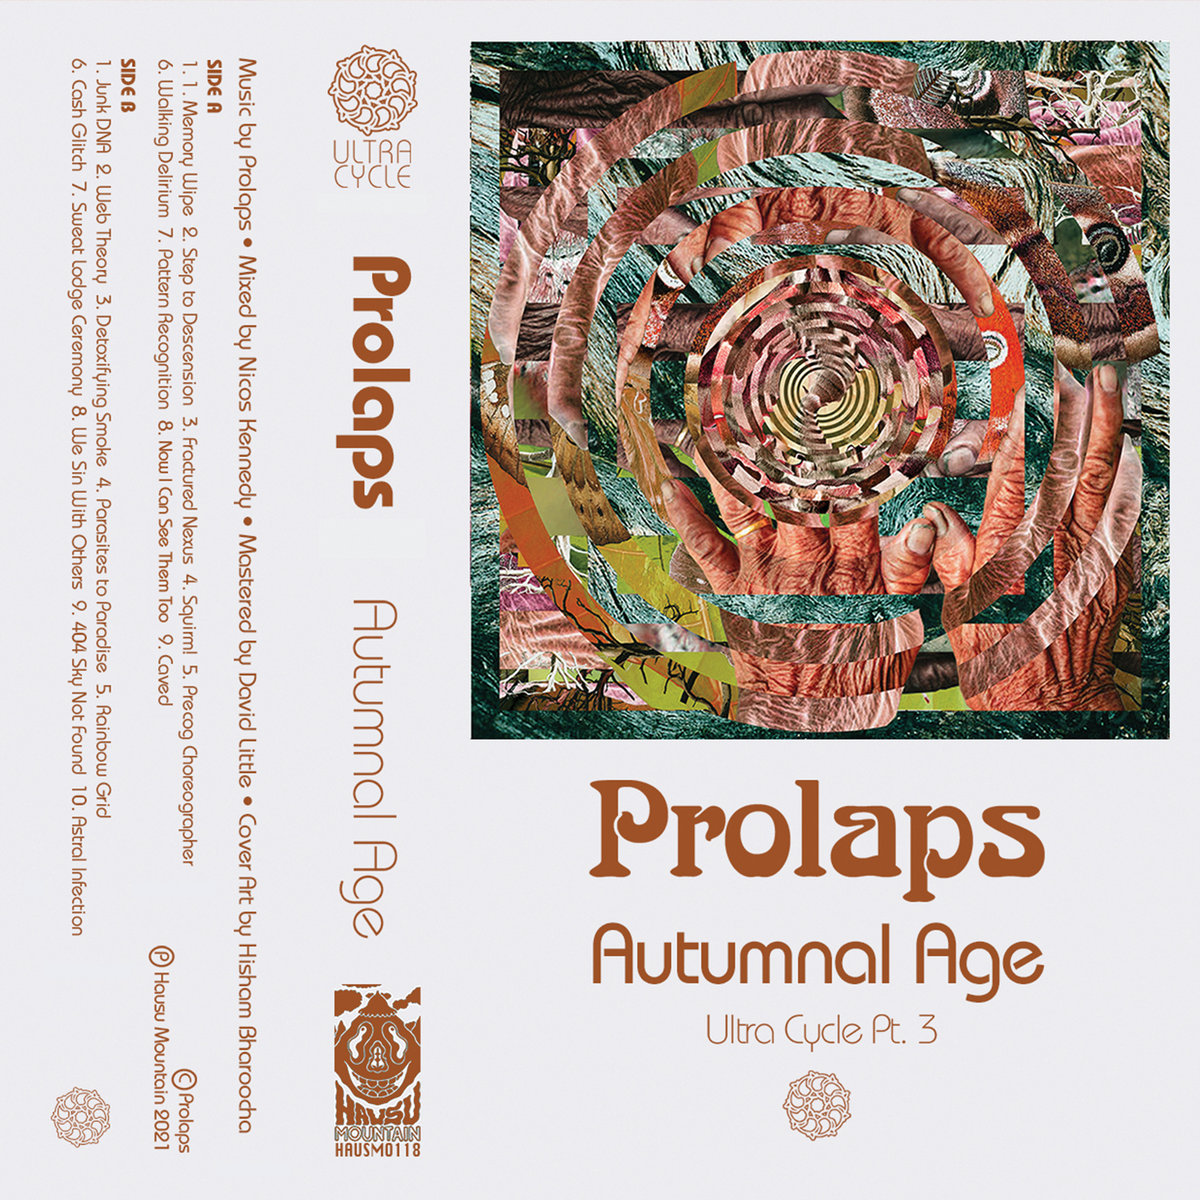 the cover art for the album 'Ultra Cycle Part 3: Autumnal Age' by Prolaps